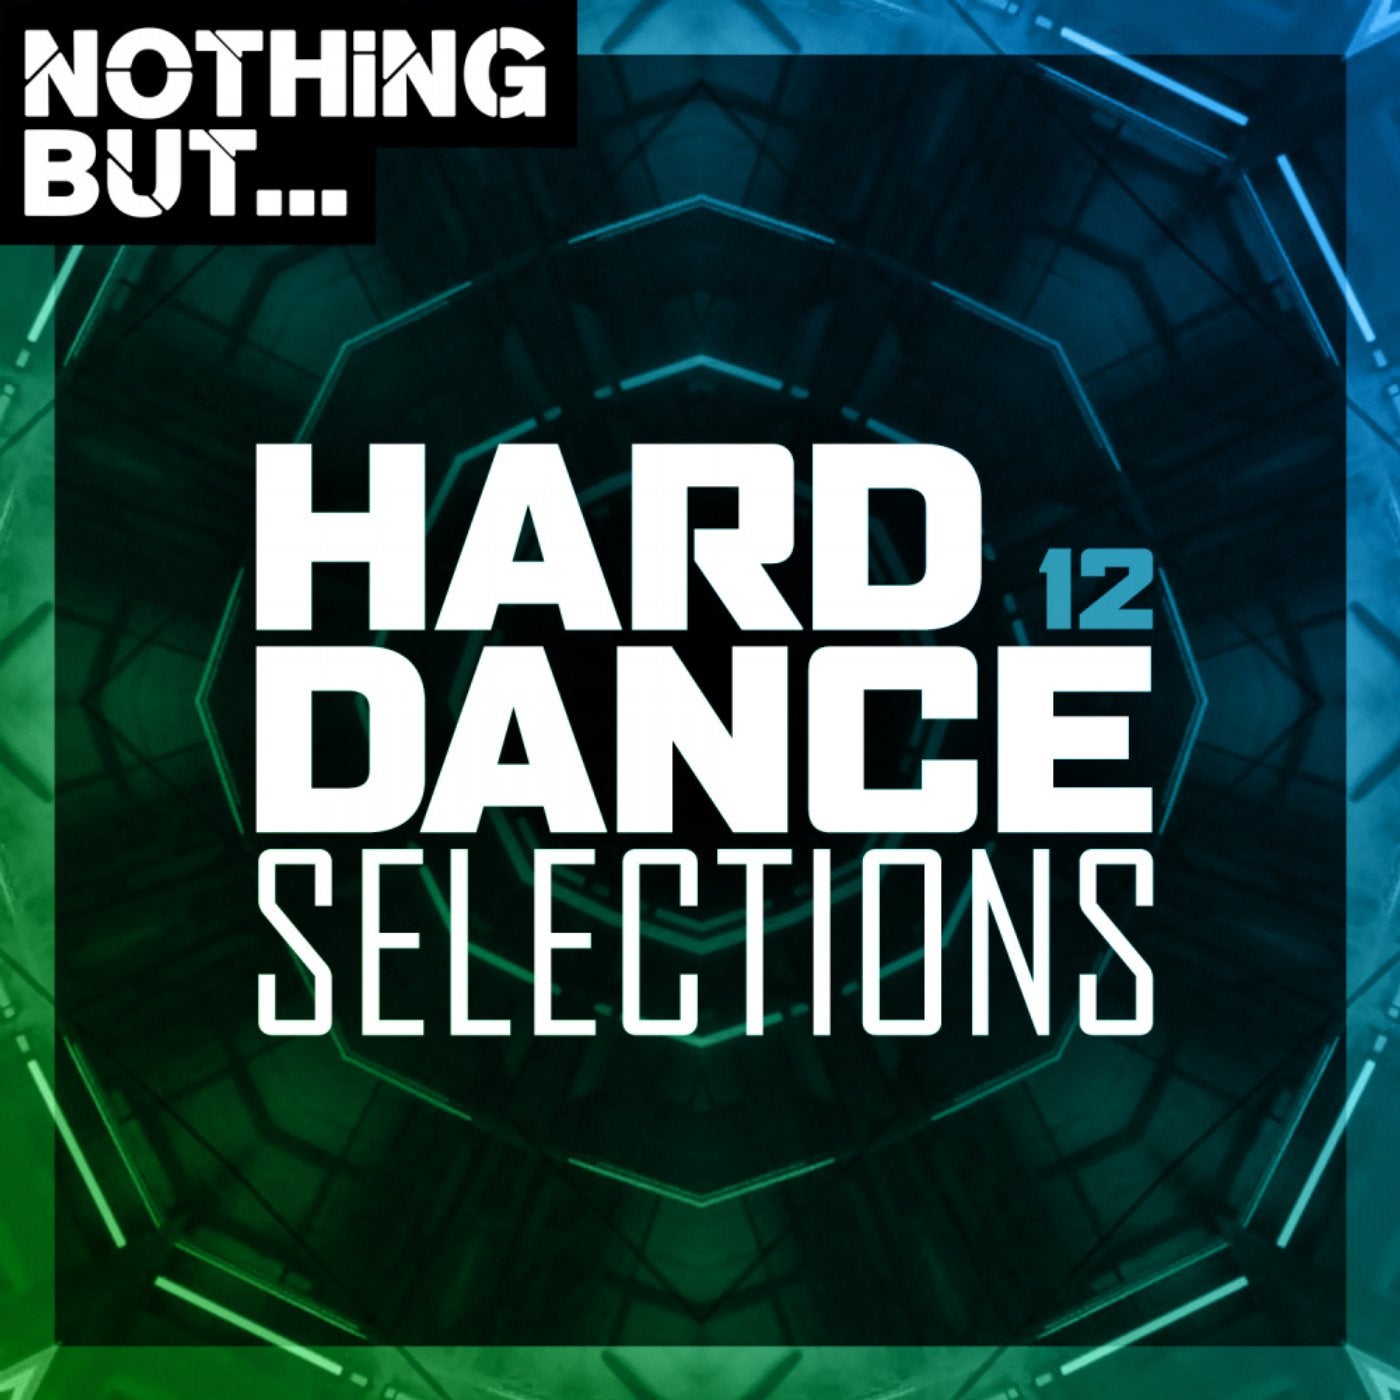 Nothing But... Hard Dance Selections, Vol. 12